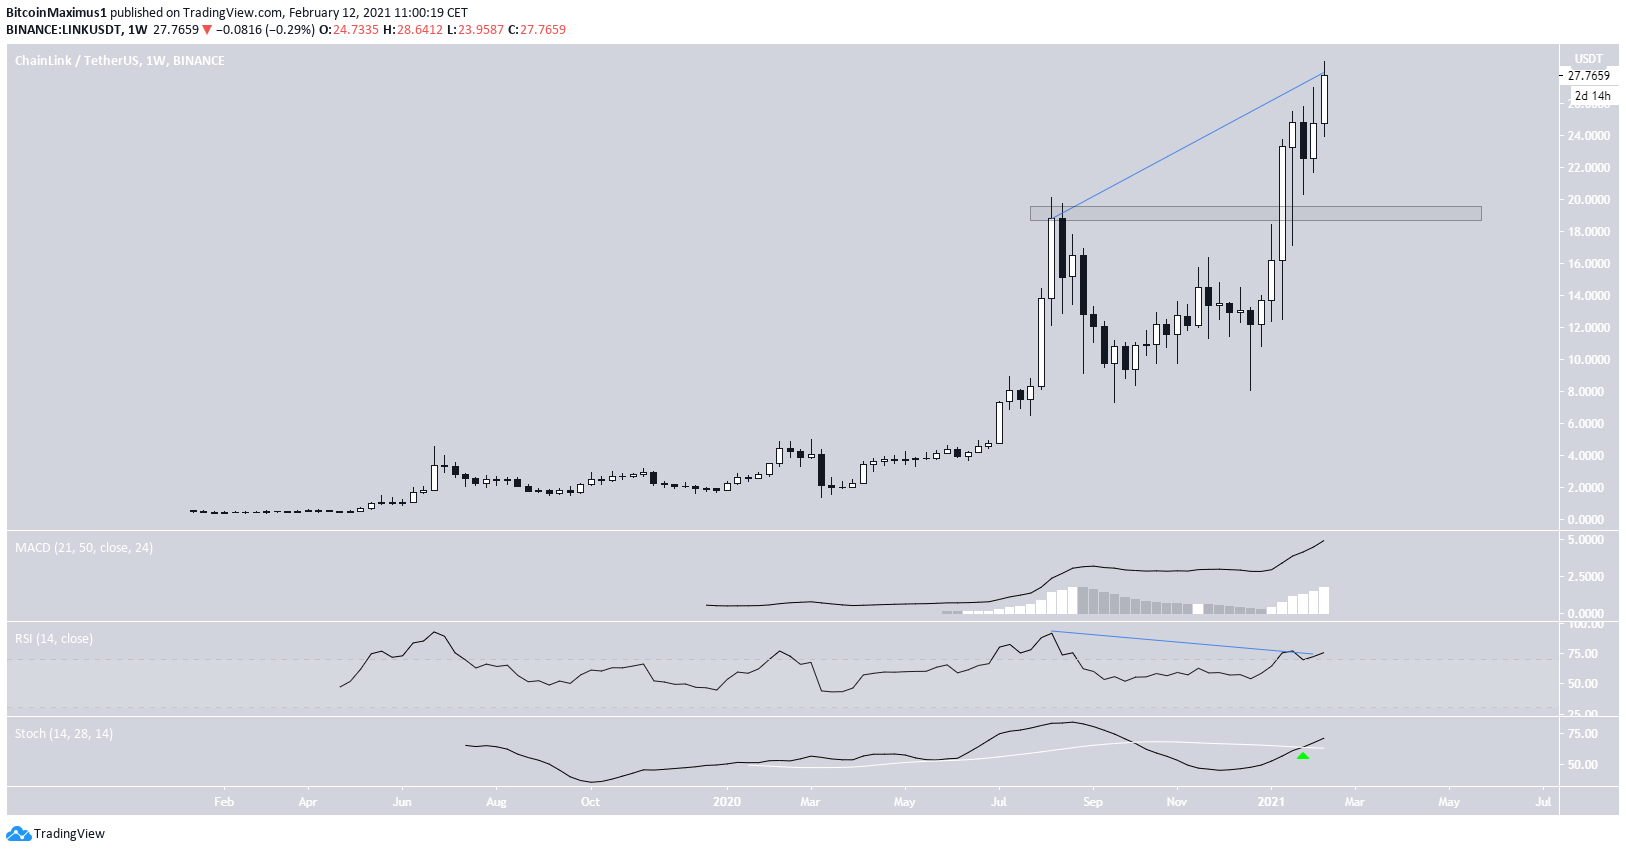 LINK Weekly Movement